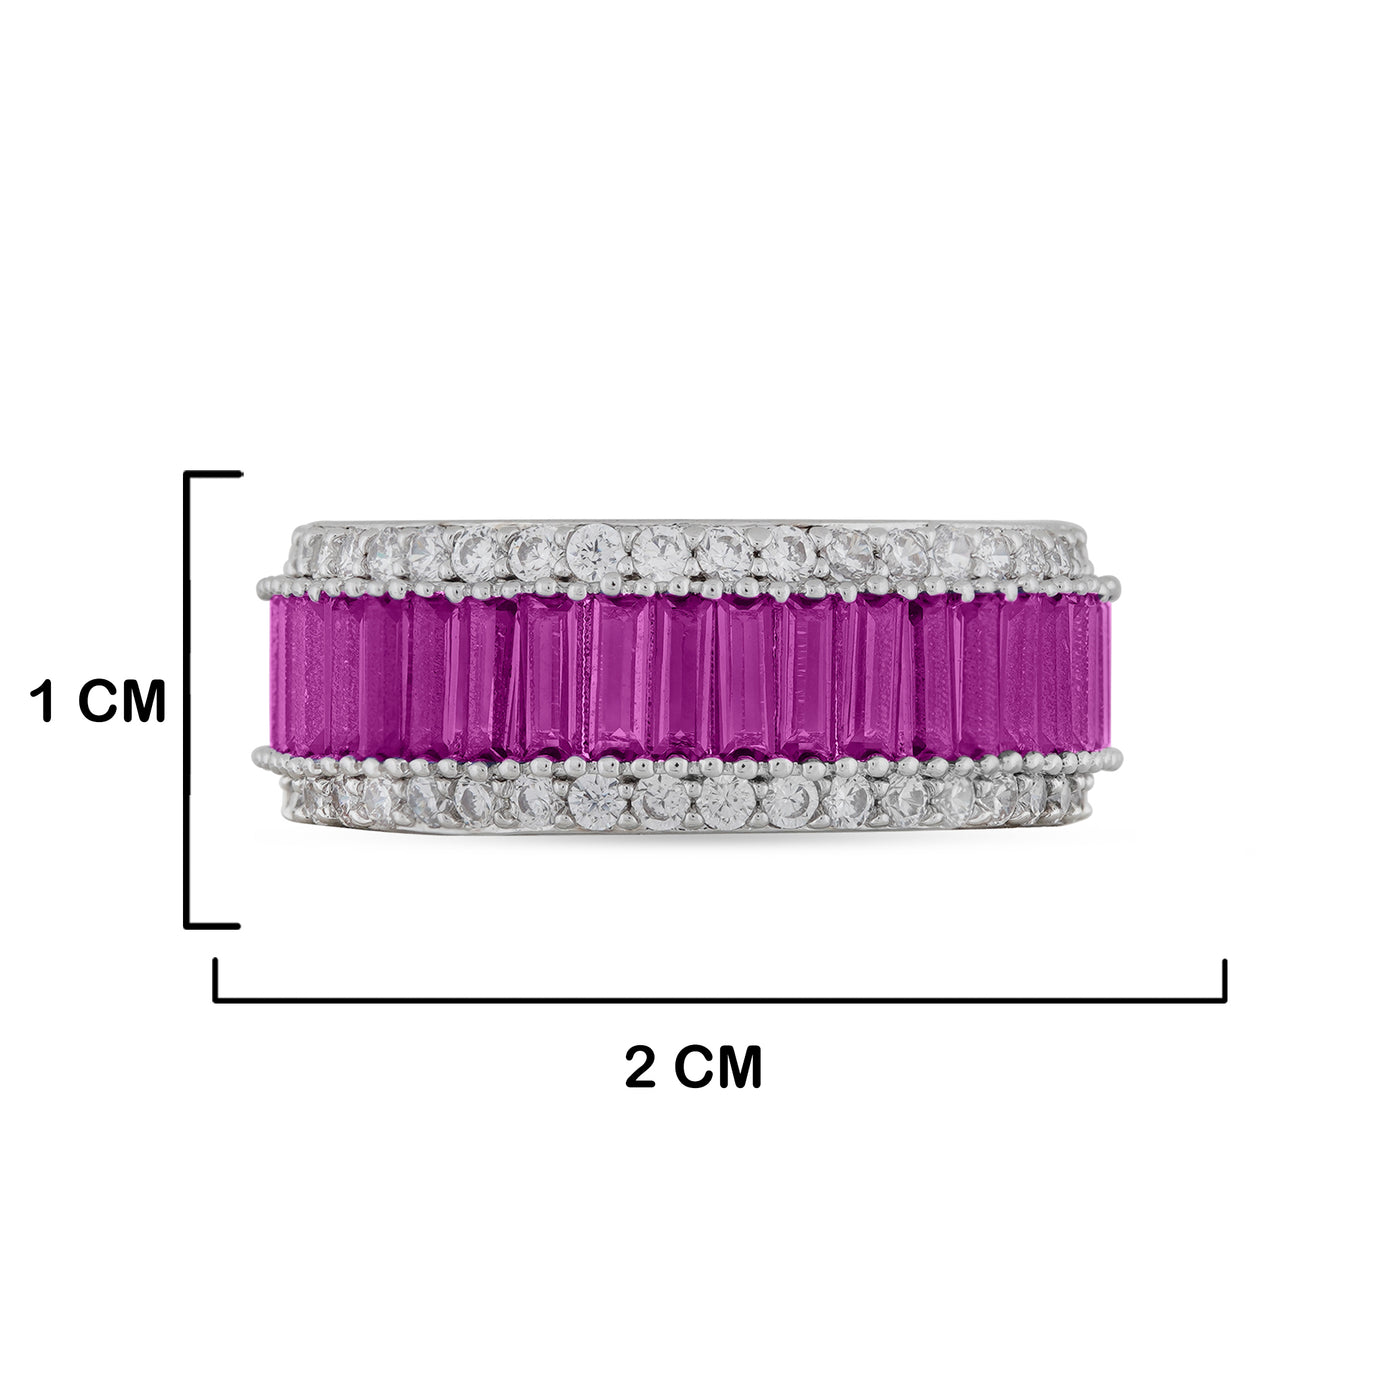 Cubic Zirconia Studded Magenta Ring with measurements in cm. 1cm by 2cm.